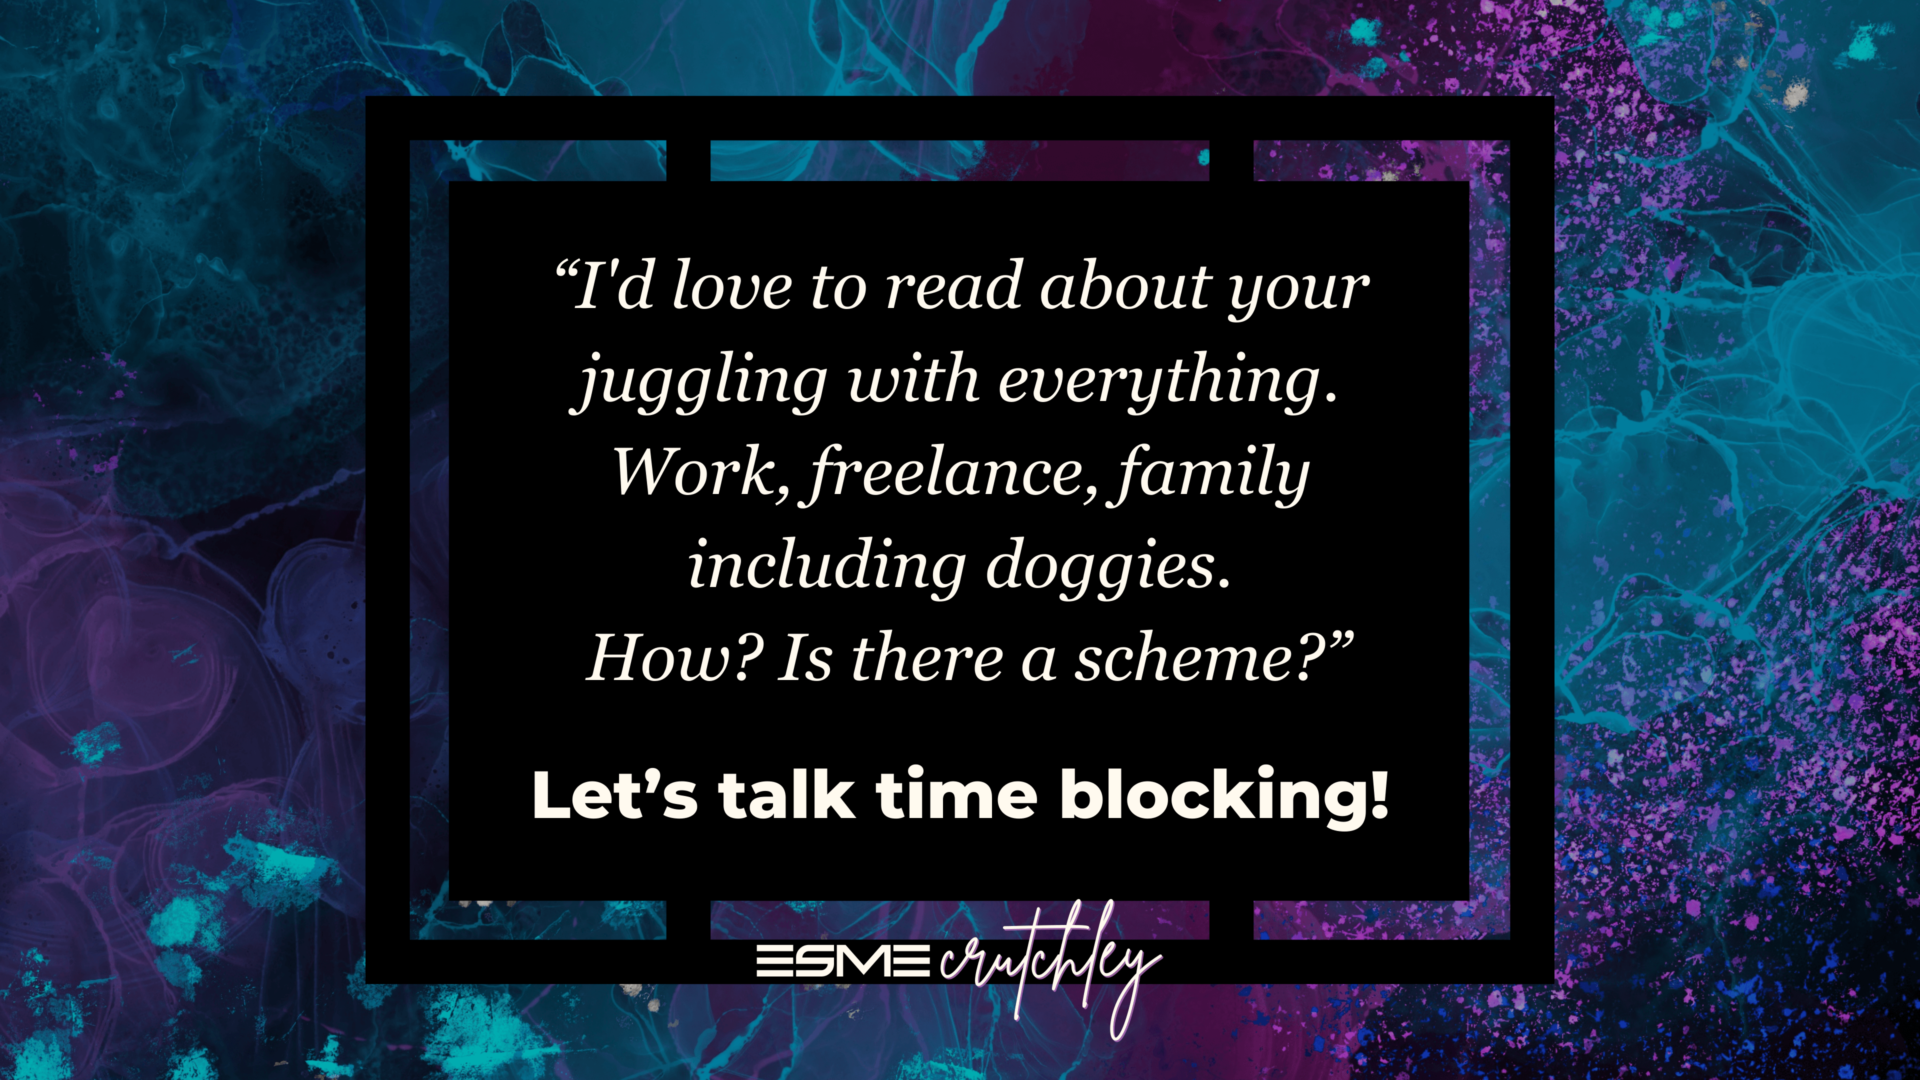 “I'd love to read about your juggling with everything. Work, freelance, family including doggies. How? Is there a scheme?” Let’s talk time blocking!